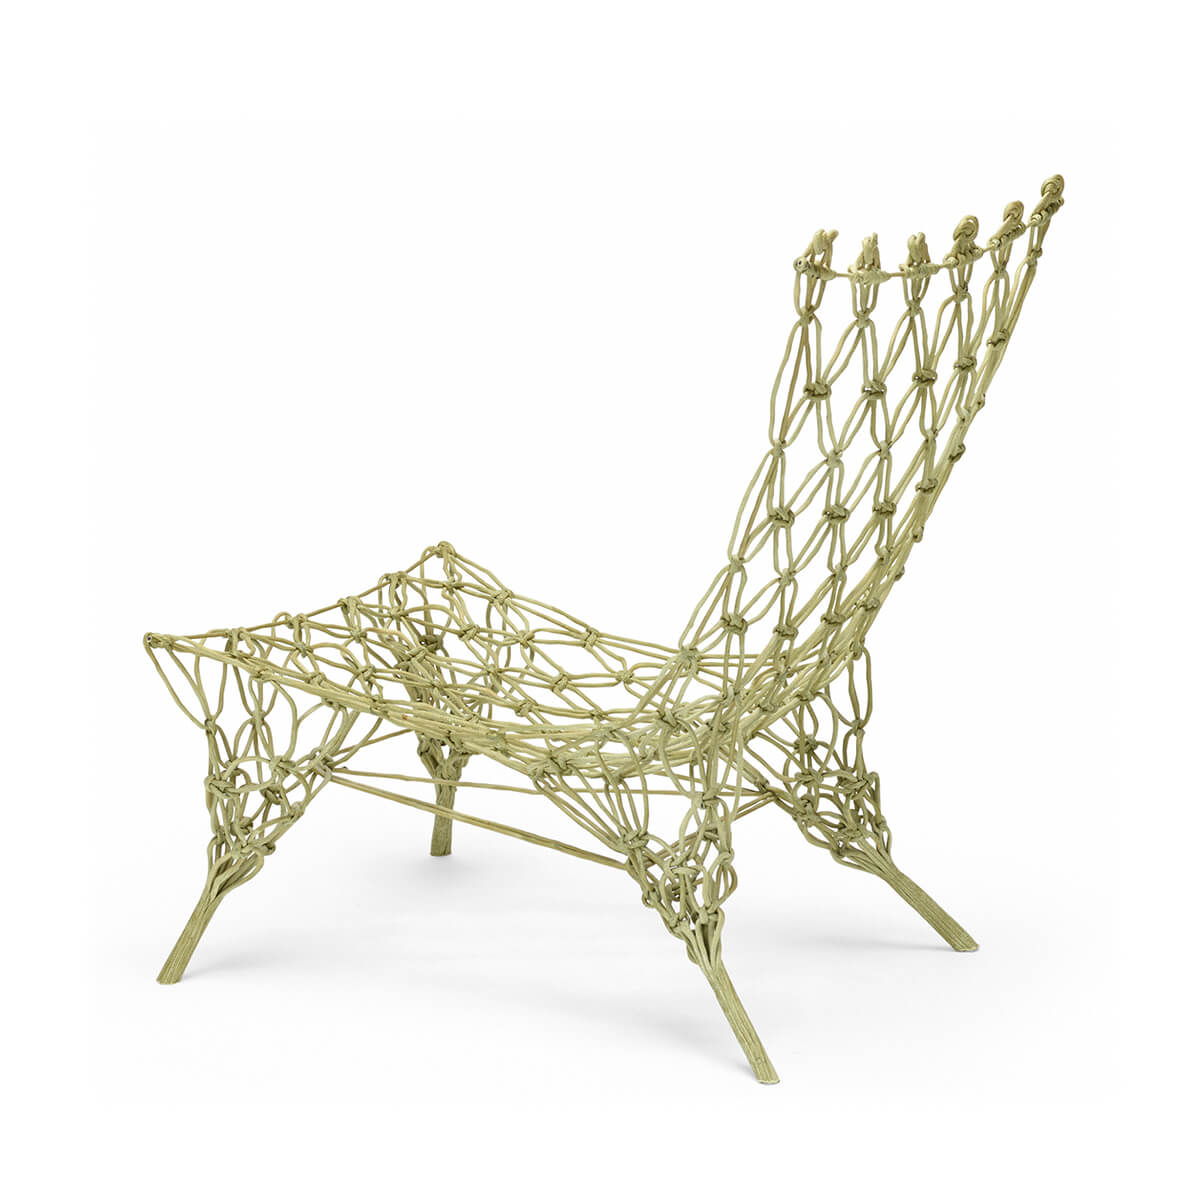 Marcel Wanders Knotted Chair Interior Design Services Boxtel